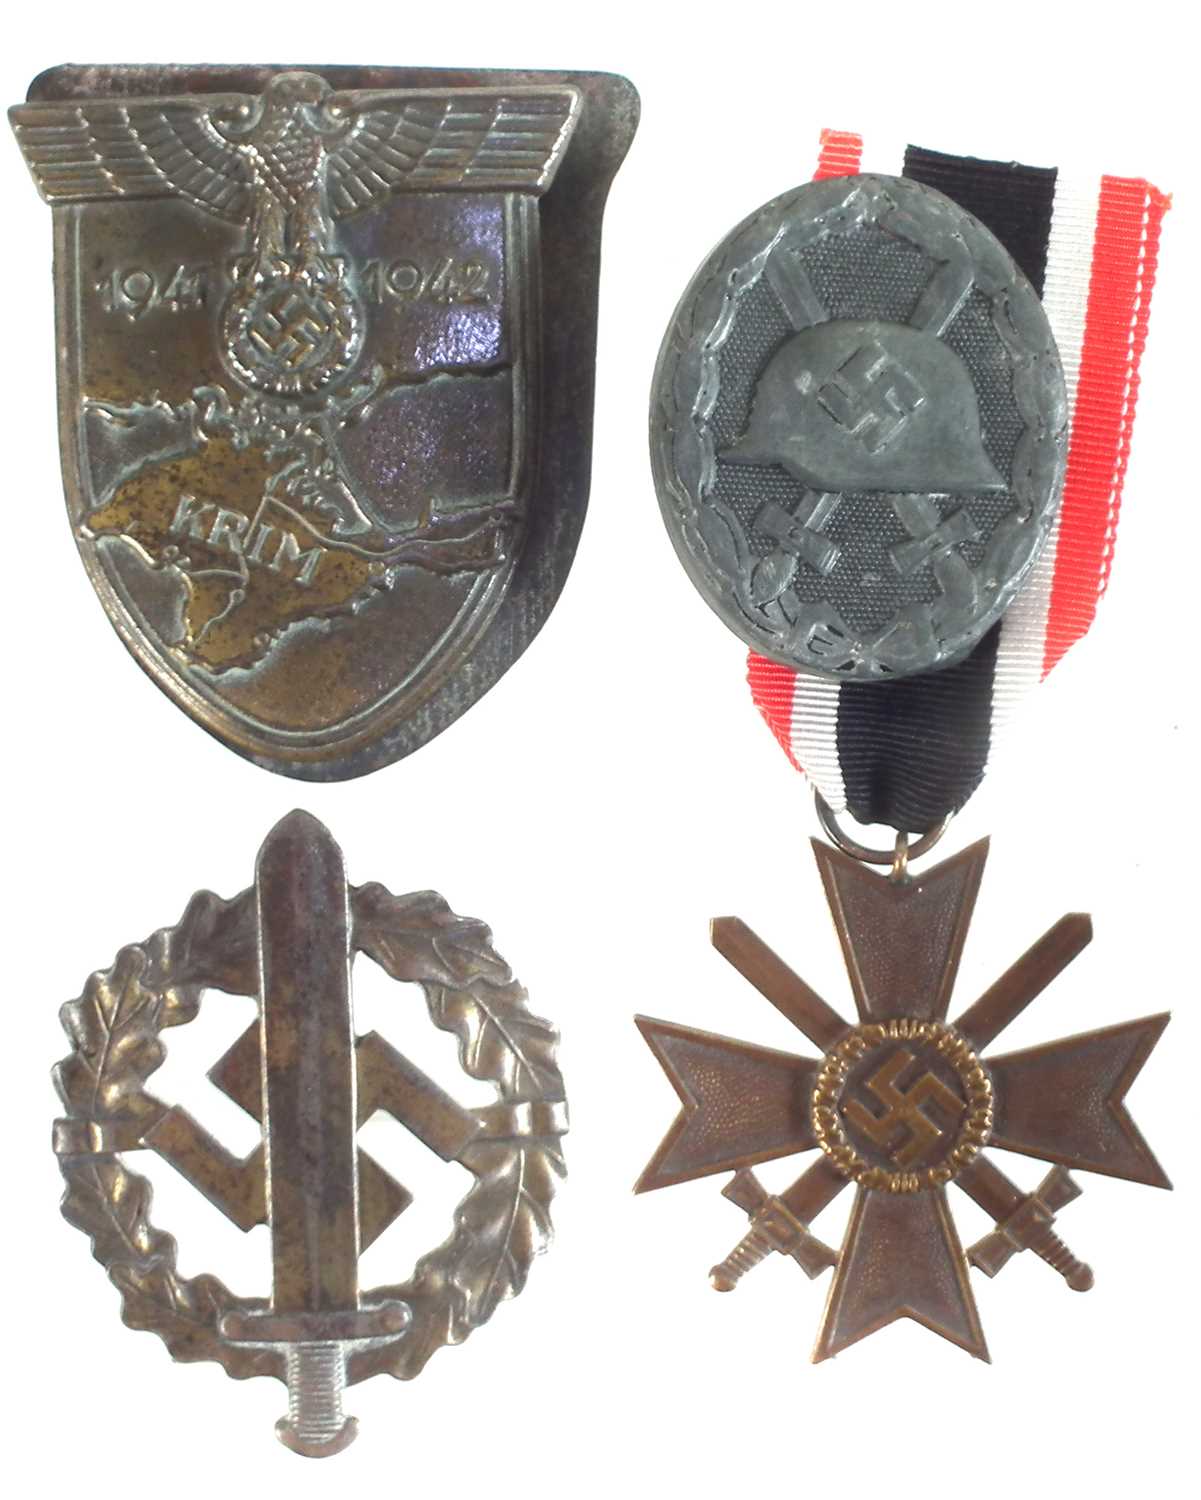 Three German Third Reich badges and a medal